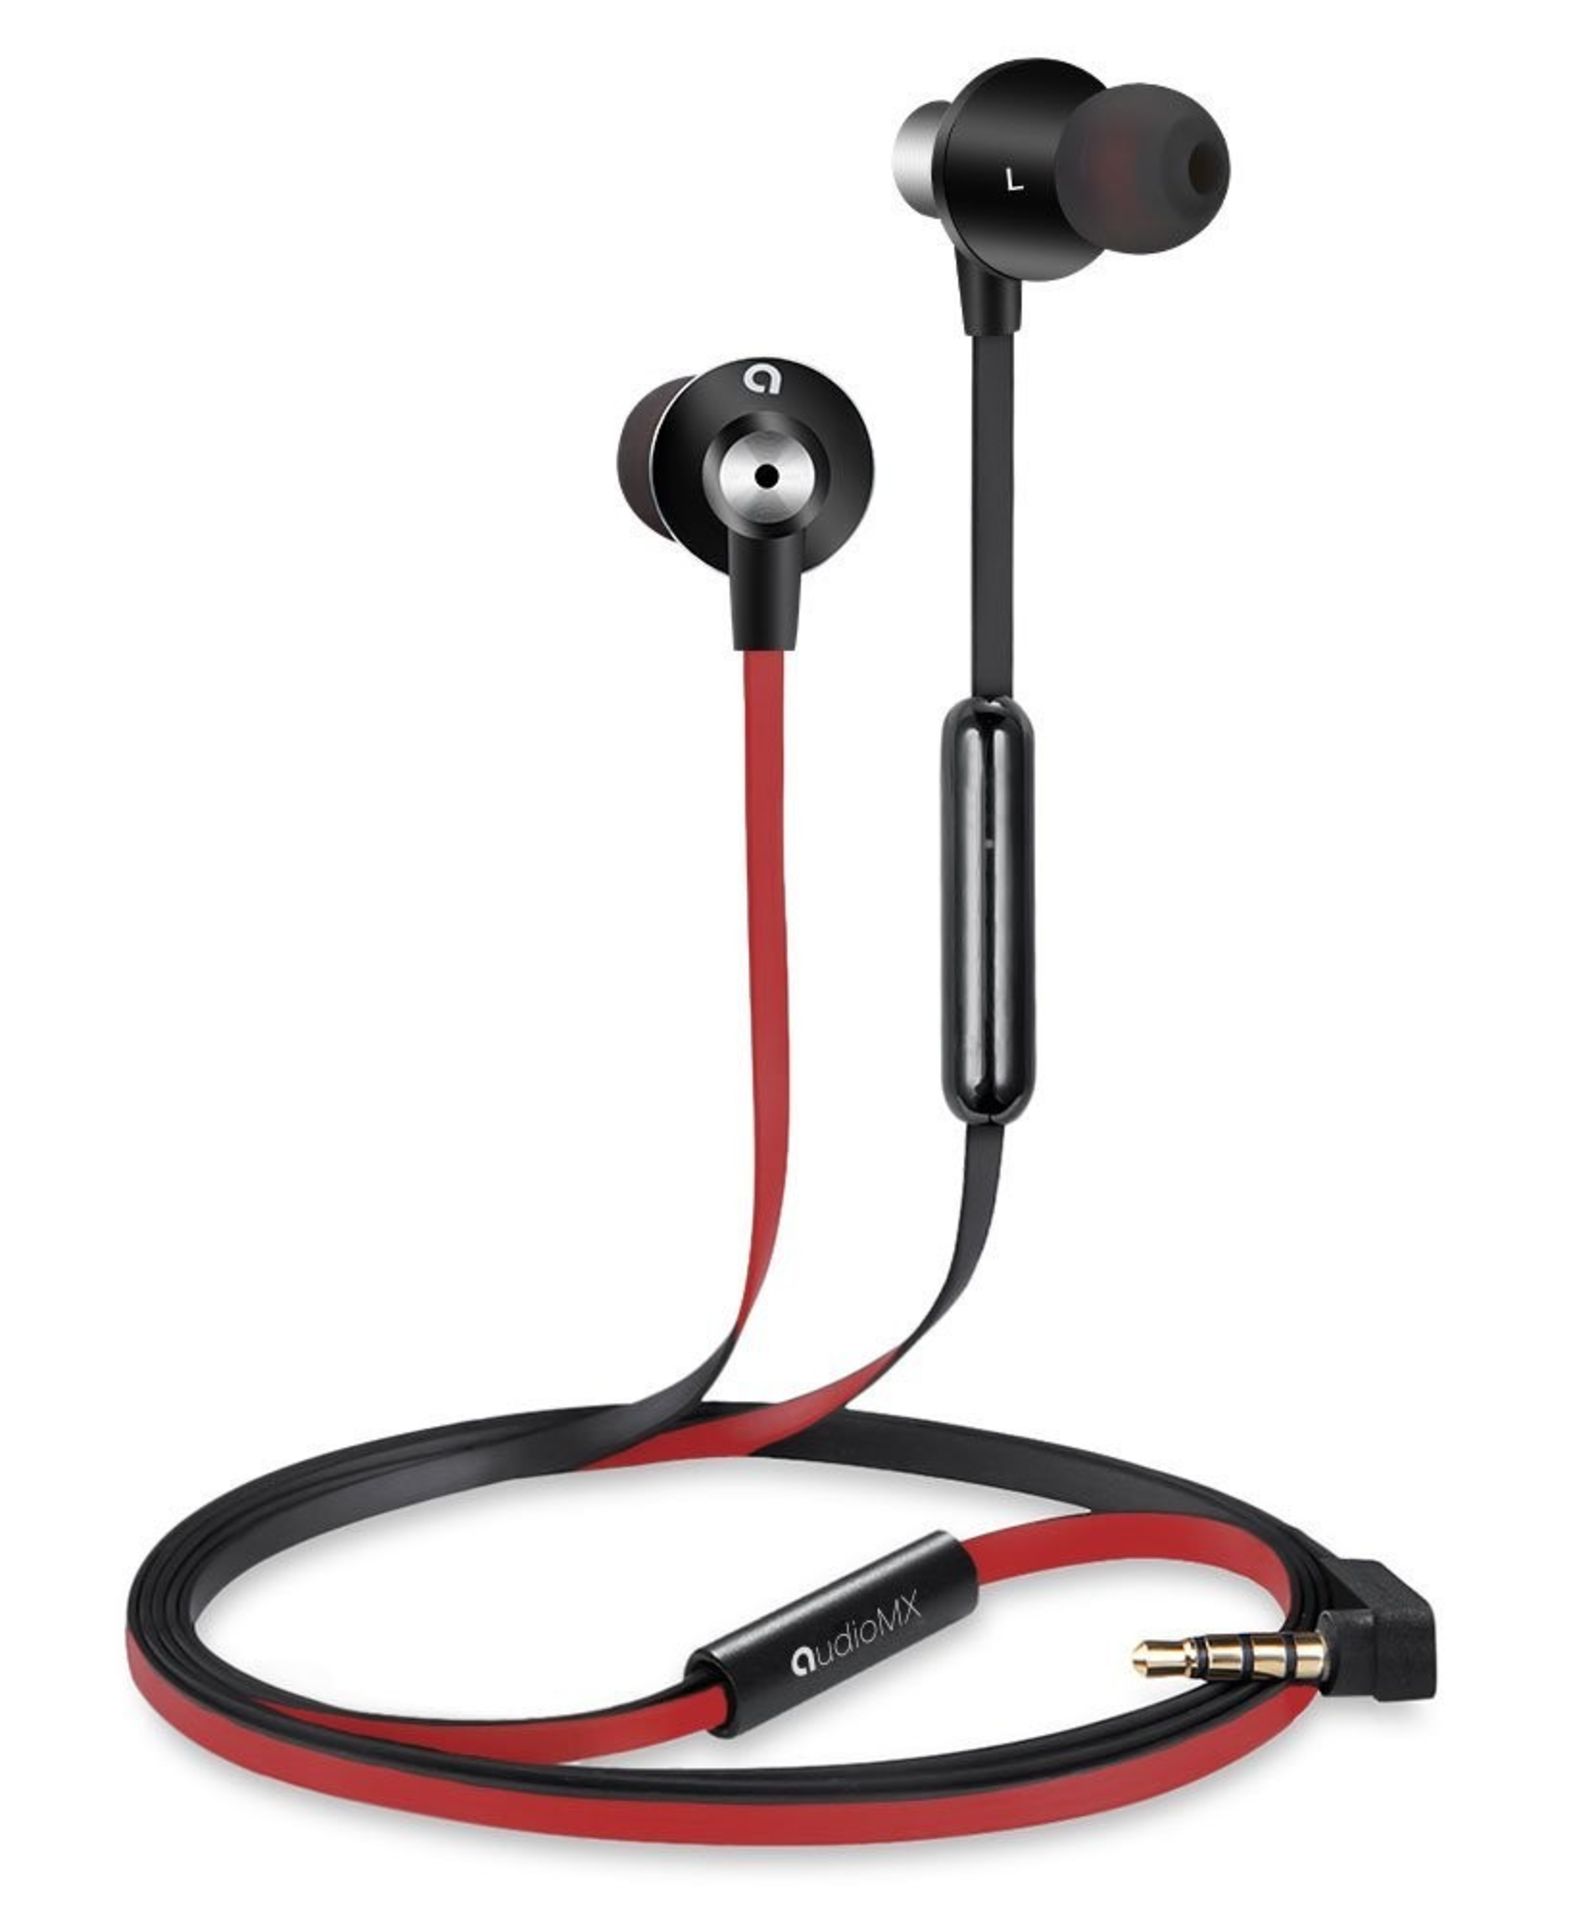 V Grade U Pair of Bluetooth Earphones/Headset (All Boxed) - Colours and Styles/Makes May Vary - Some - Image 7 of 7